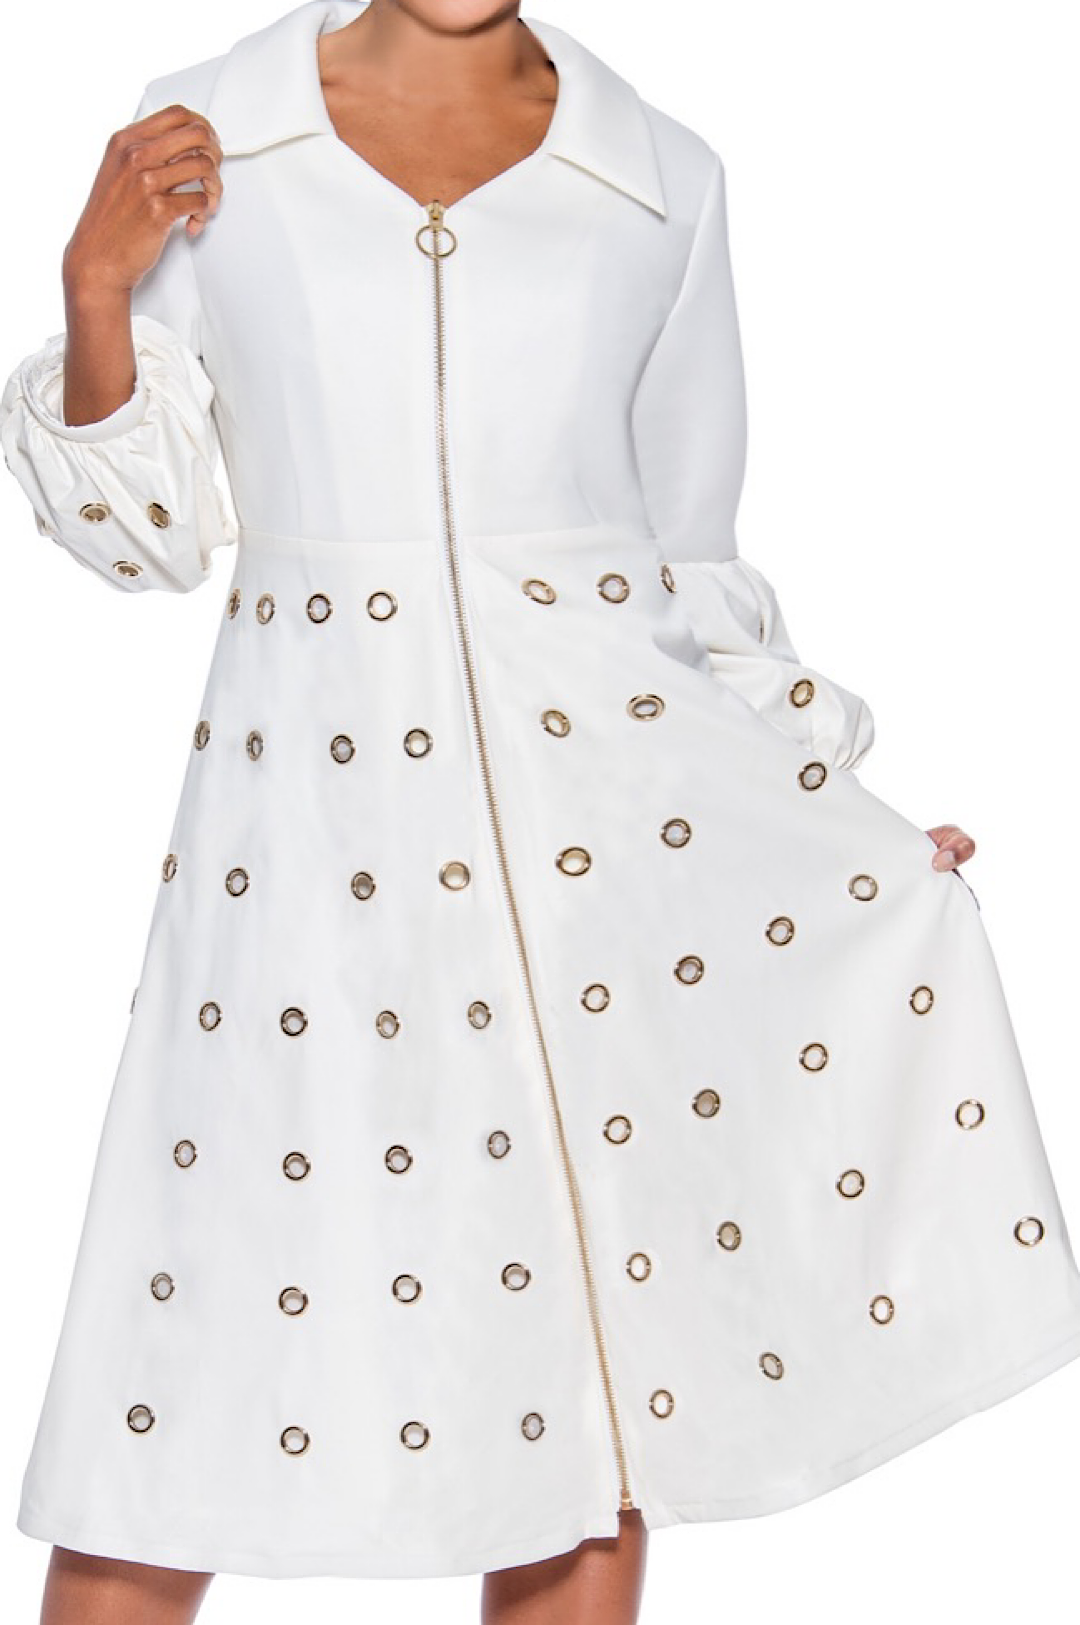 Winter White Faux Leather Gold Grommet Dress (7851350589614)